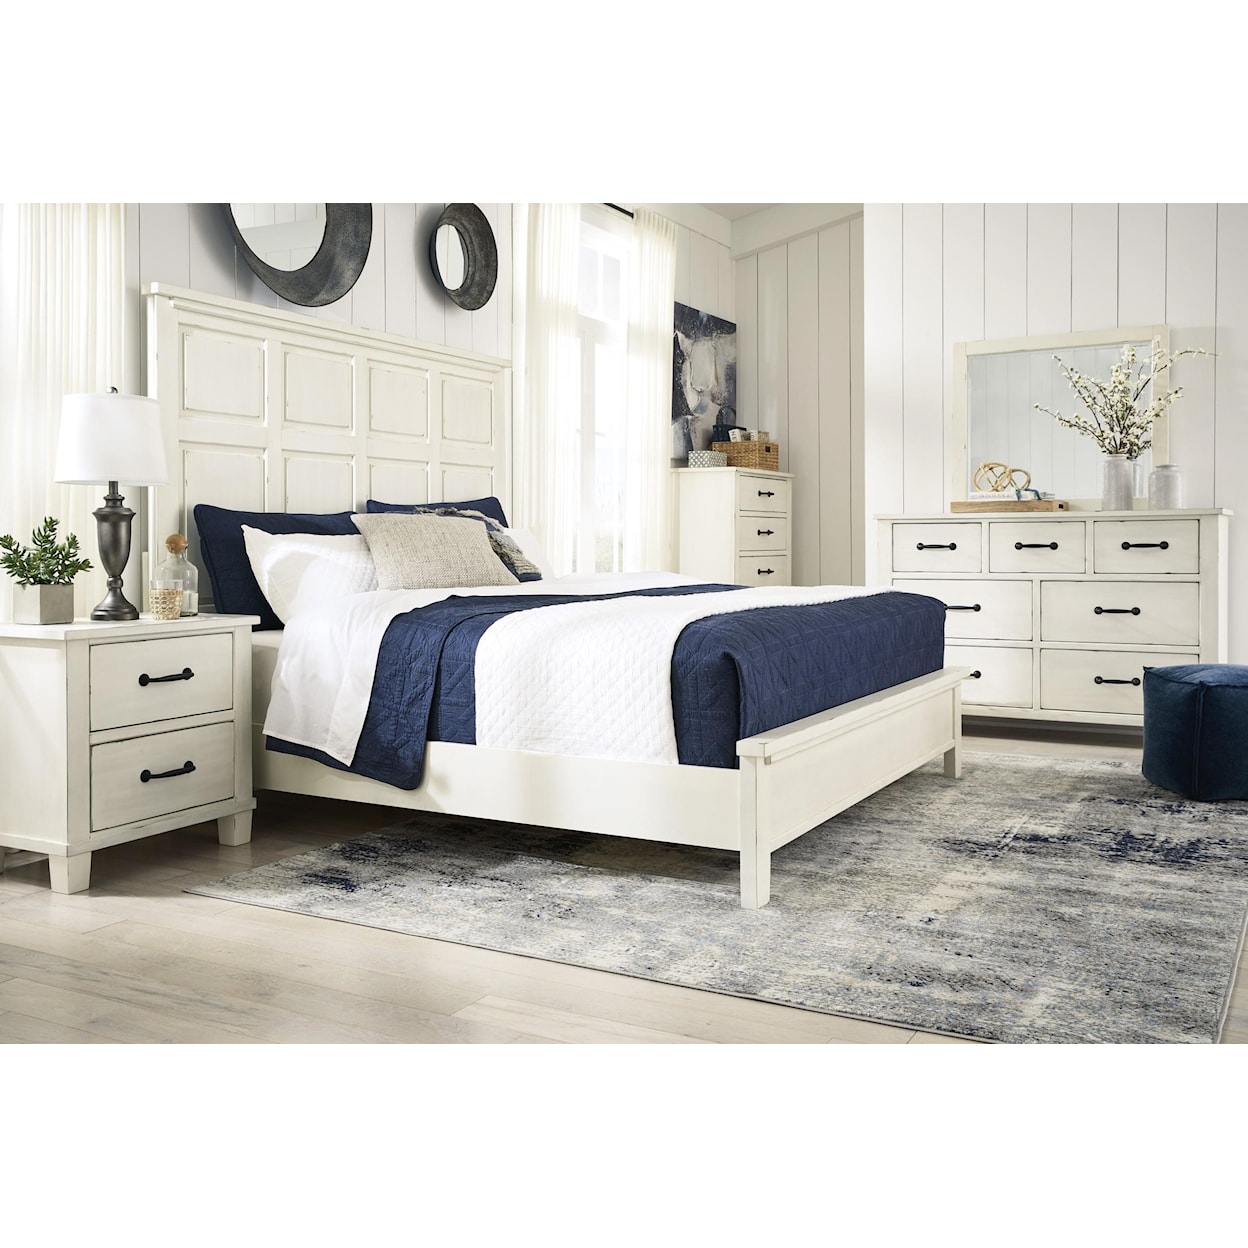 Signature Design by Ashley Braunter Queen 5-PC Bedroom Set